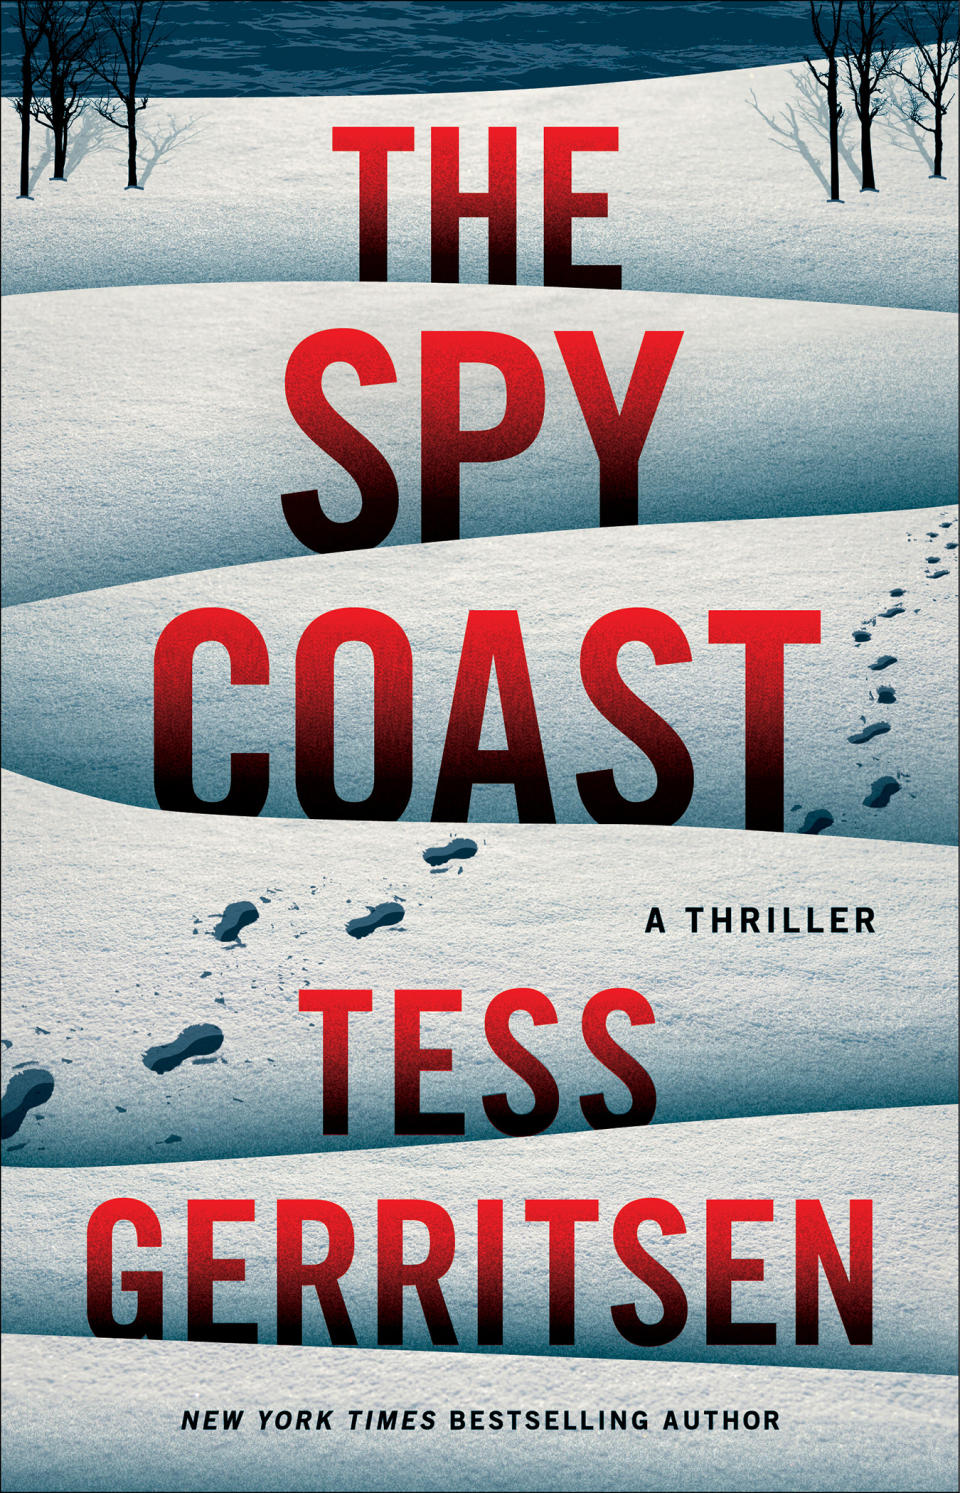 This cover image released by Thomas & Mercer shows "The Spy Coast" by Tess Gerritsen. (Thomas & Mercer via AP)